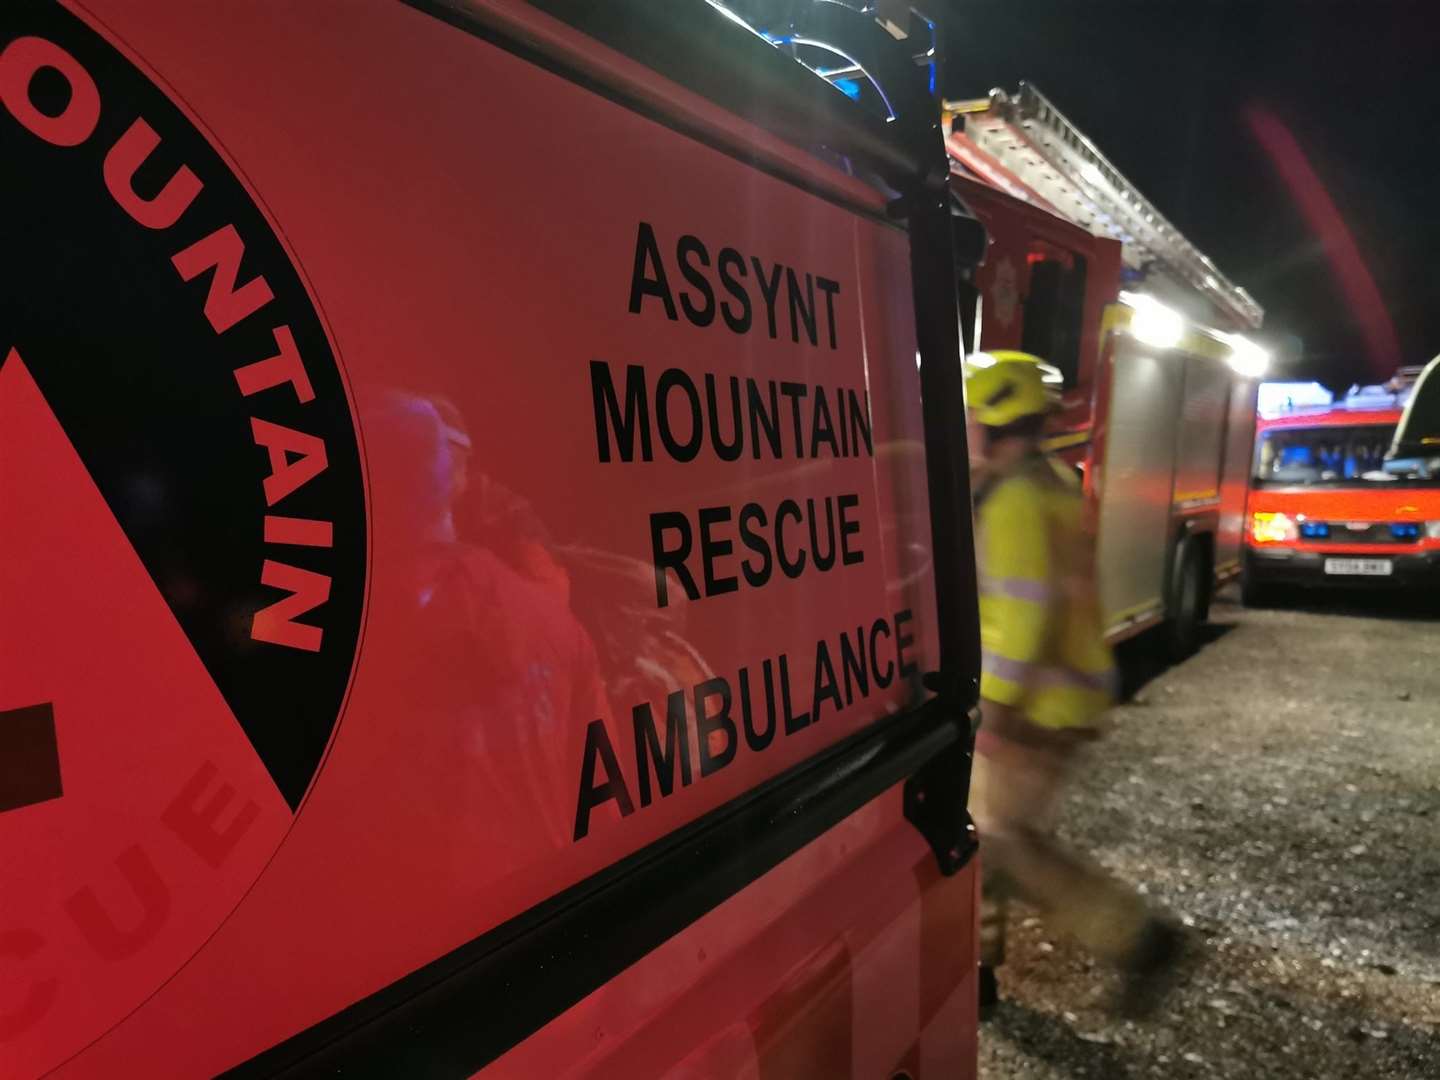 Assynt Mountain Rescue Team covers all of Caithness and Sutherland.